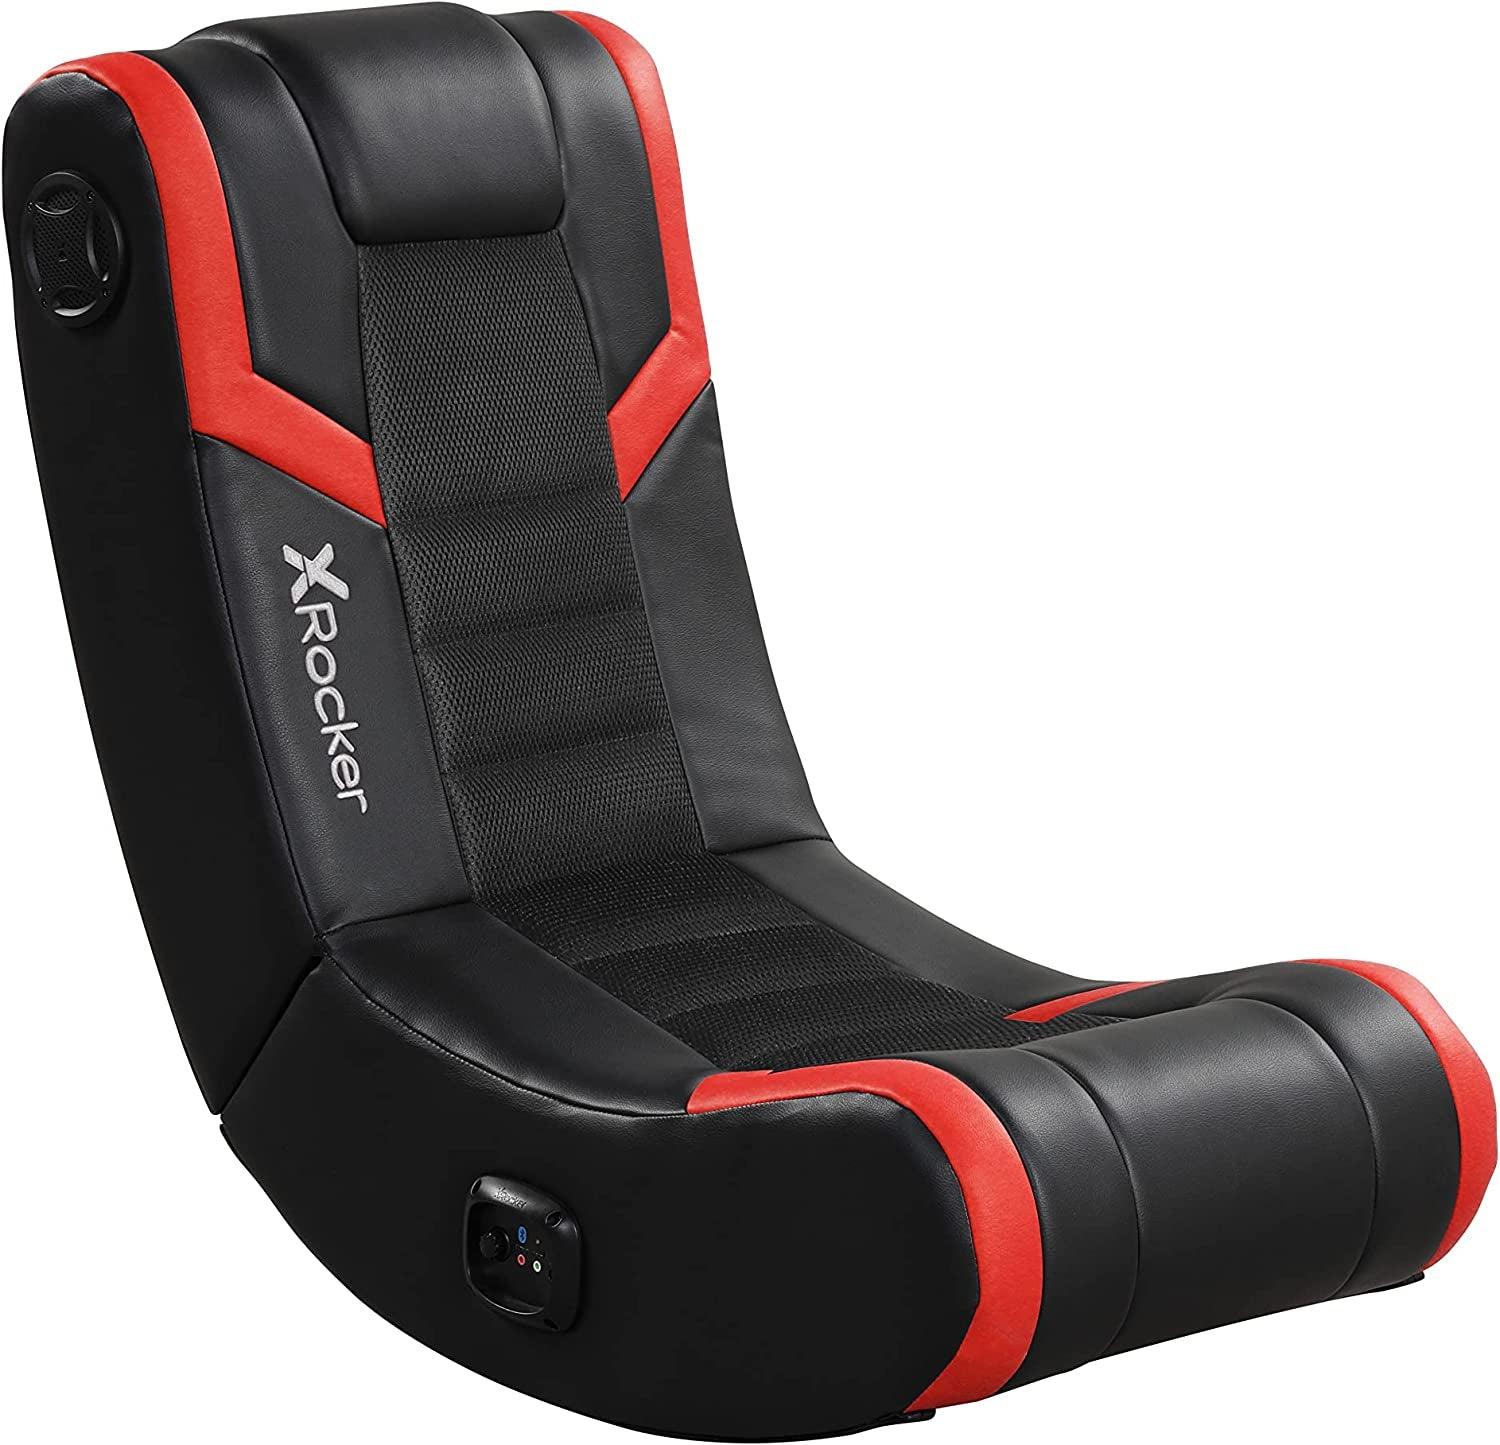 X Rocker Floor Rocking Gaming Chair, Headrest Mounted Bluetooth Speakers for Audio, Compatible with All Major Gaming Consoles